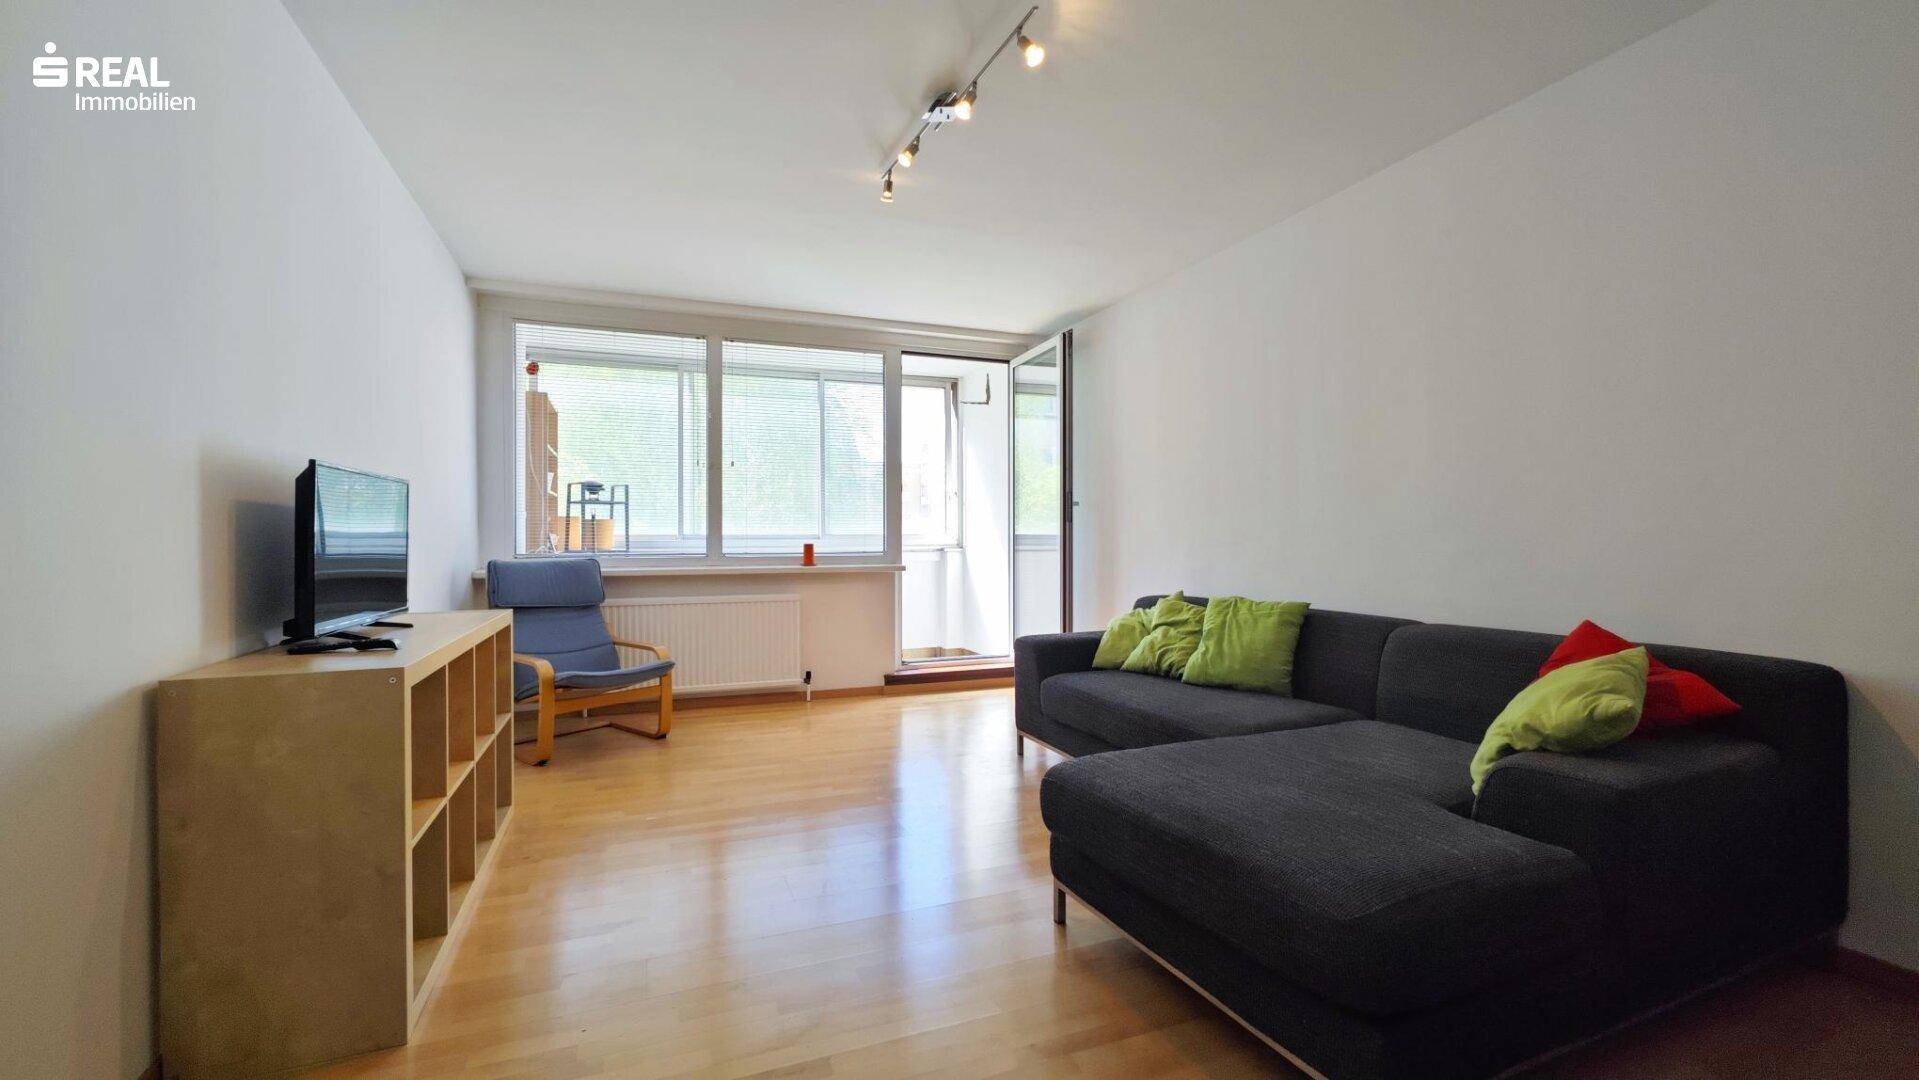 https://pictures.immobilienscout24.de/prod.www.immobilienscout24.at/pictureserver/loadPicture?q=70&id=012.0012000001E3qlh-1713188664-45f60cb61ad9483a8511703a0339be7f